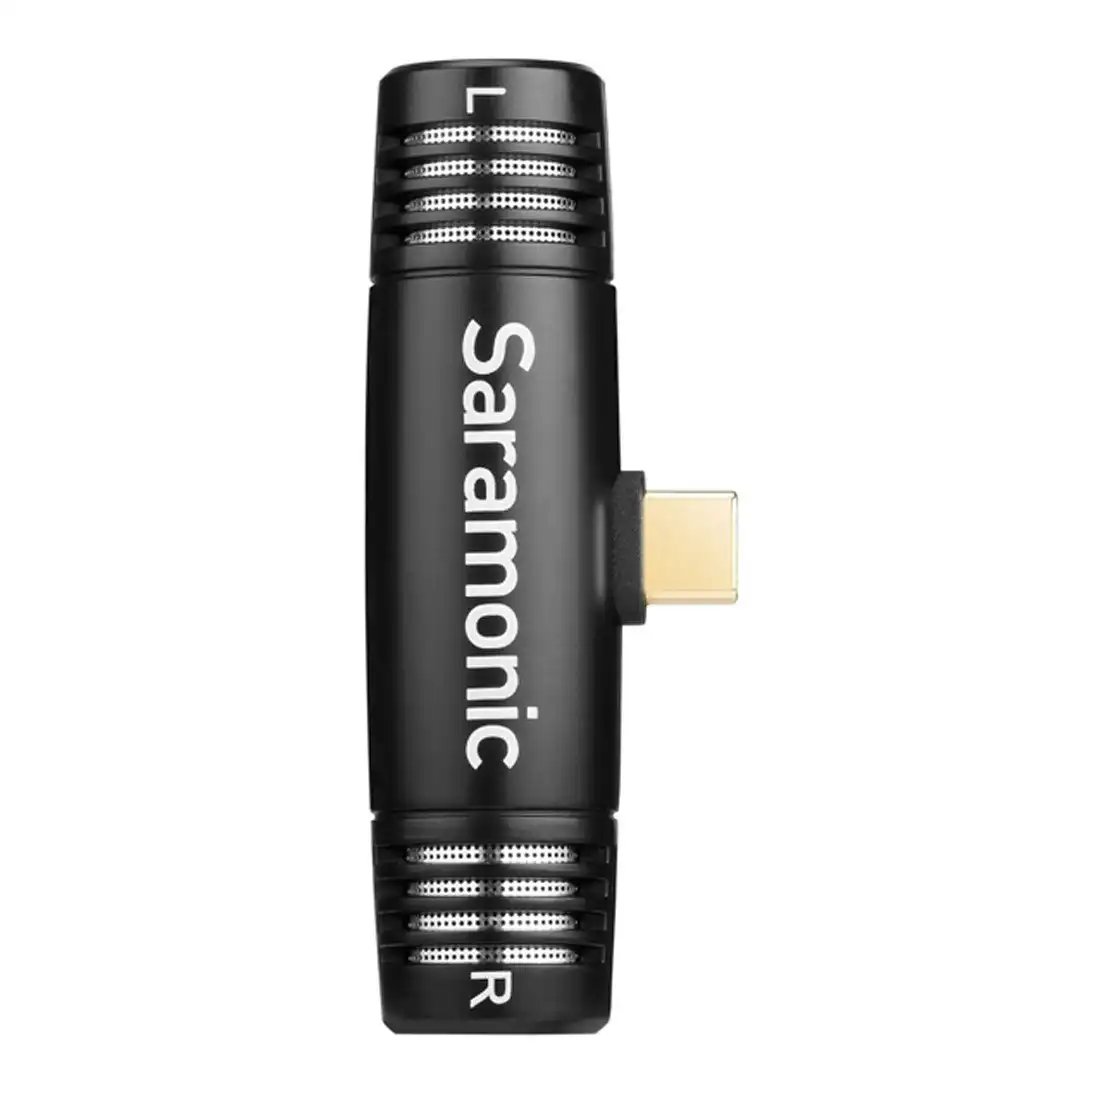 Saramonic SPMIC510UC Compact Stereo Microphone for Android Devices with USB Type-C Connector